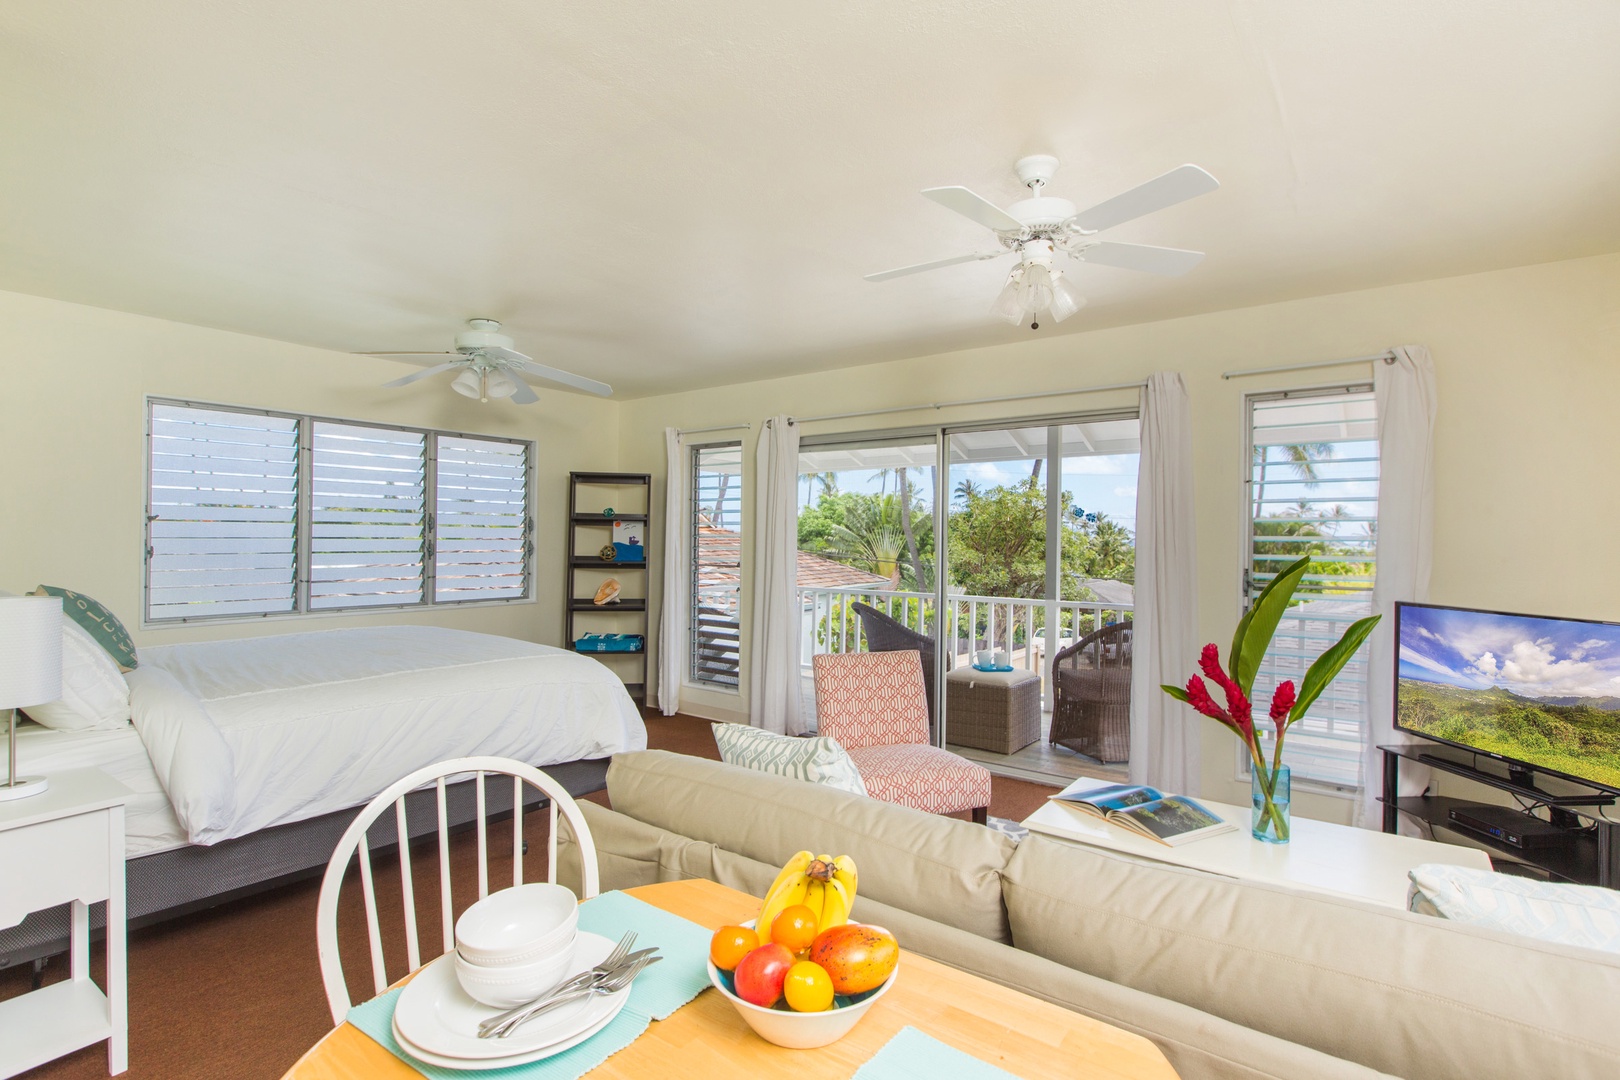 Kailua Vacation Rentals, Lanikai Cottage - Guest cottage with king bed, pull-out sofa, full bath, lanai, wet bar, and new split air conditioning!